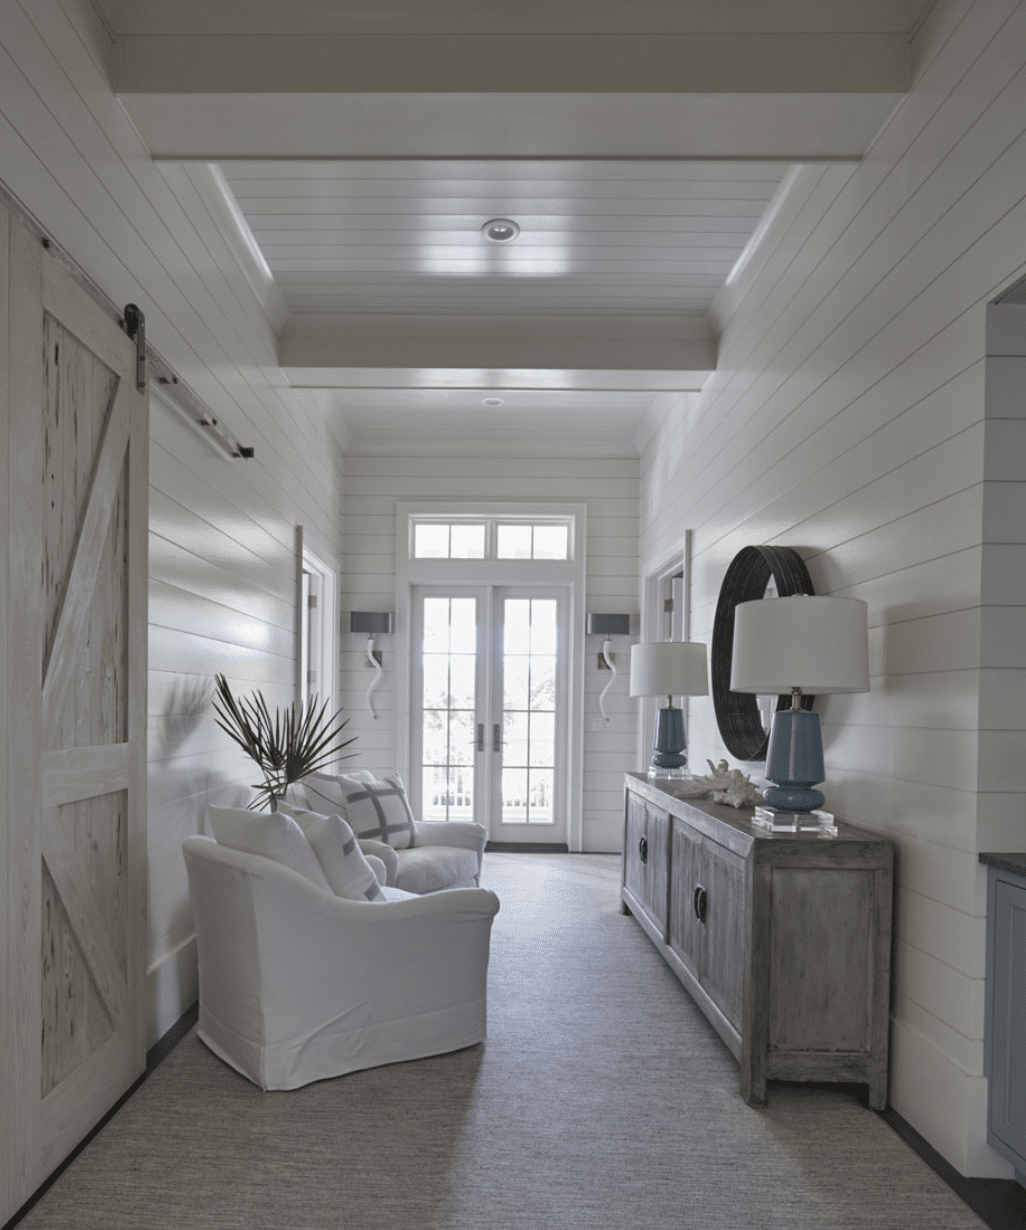  Geoff Chick Architects captivates the heart with its elegant and calming design, showcasing a harmonious blend of blue and white tones that mirror the nearby ocean waves and sandy shores. - Colleen Duffley Productions